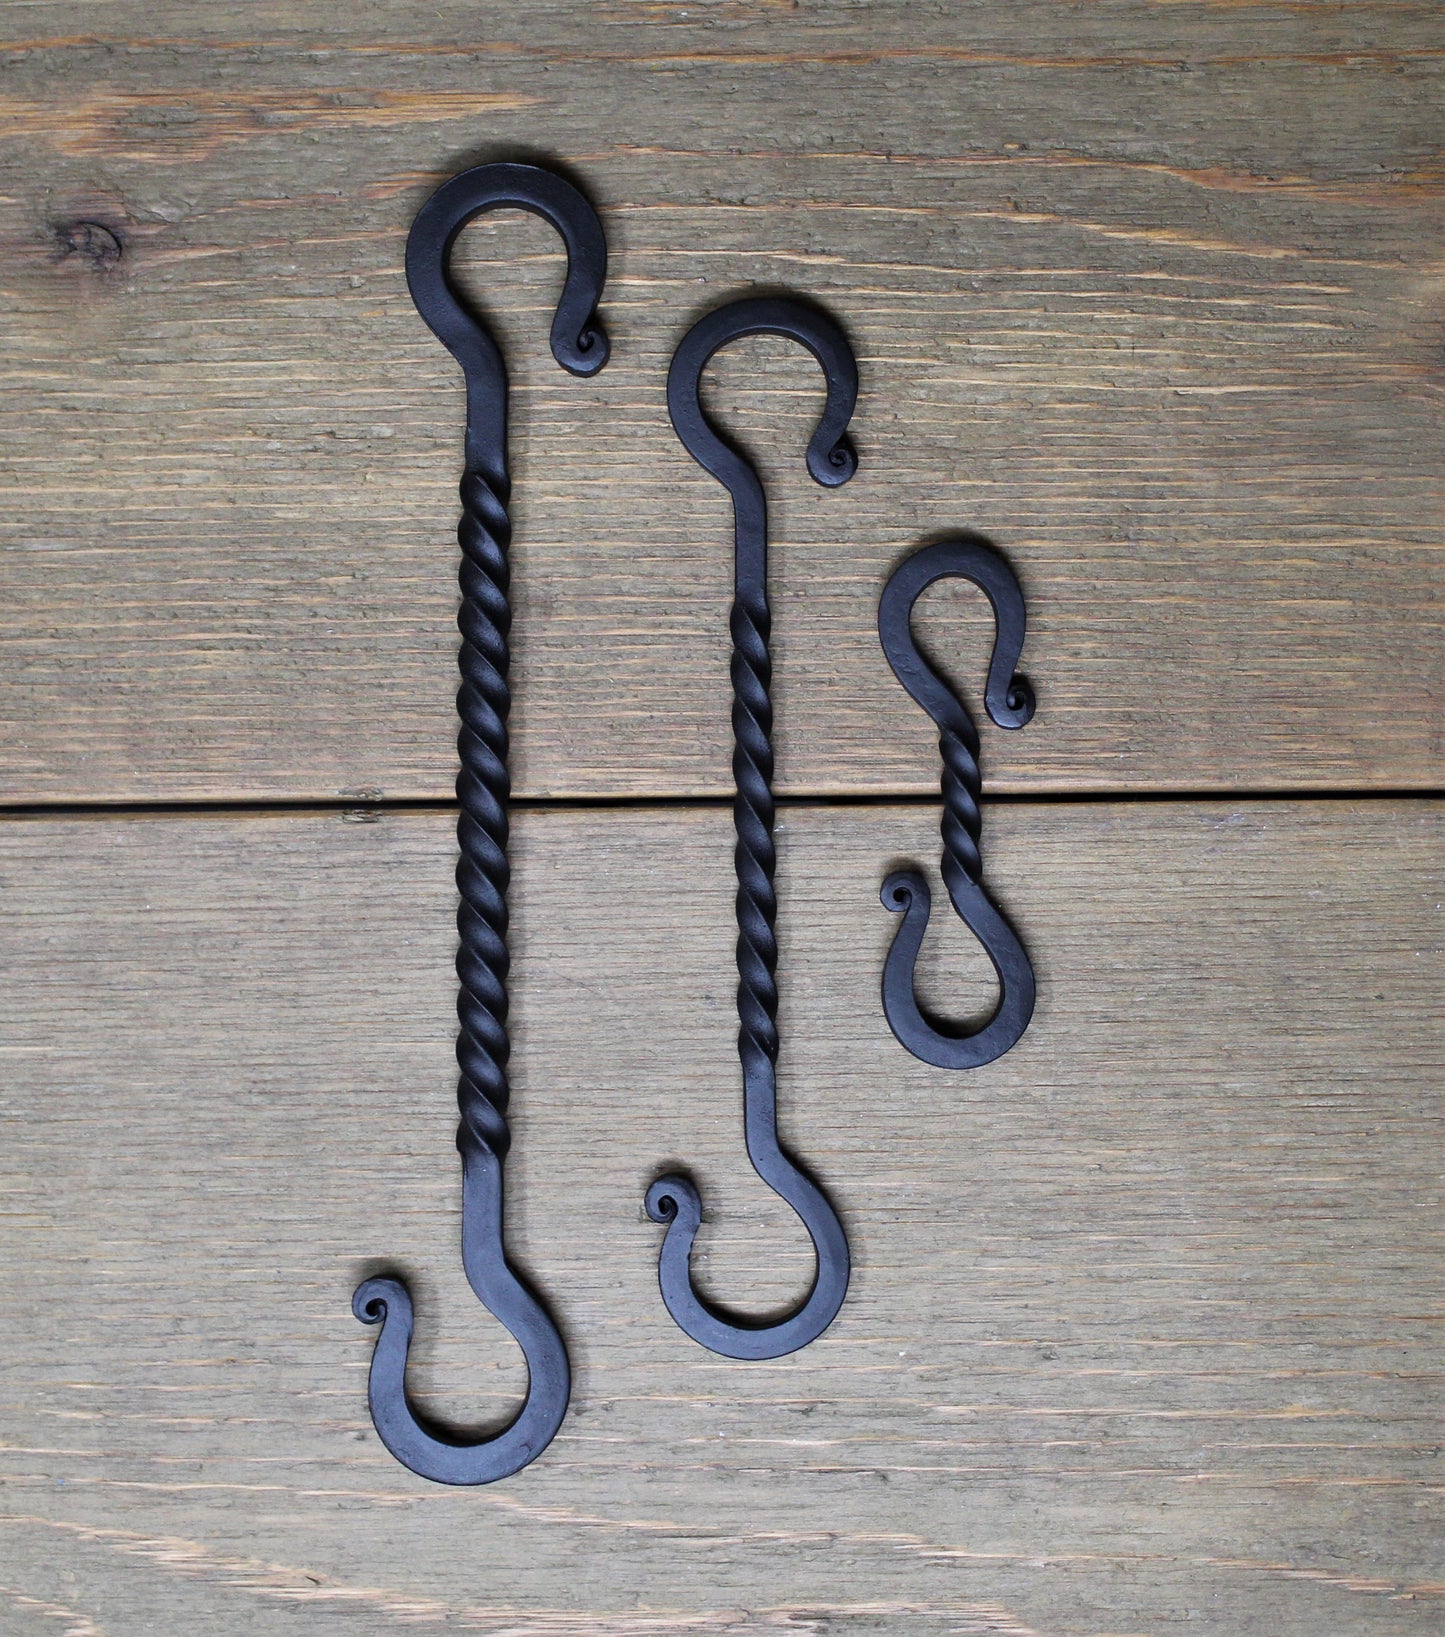 Village Wrought Iron 12 inch S Hook